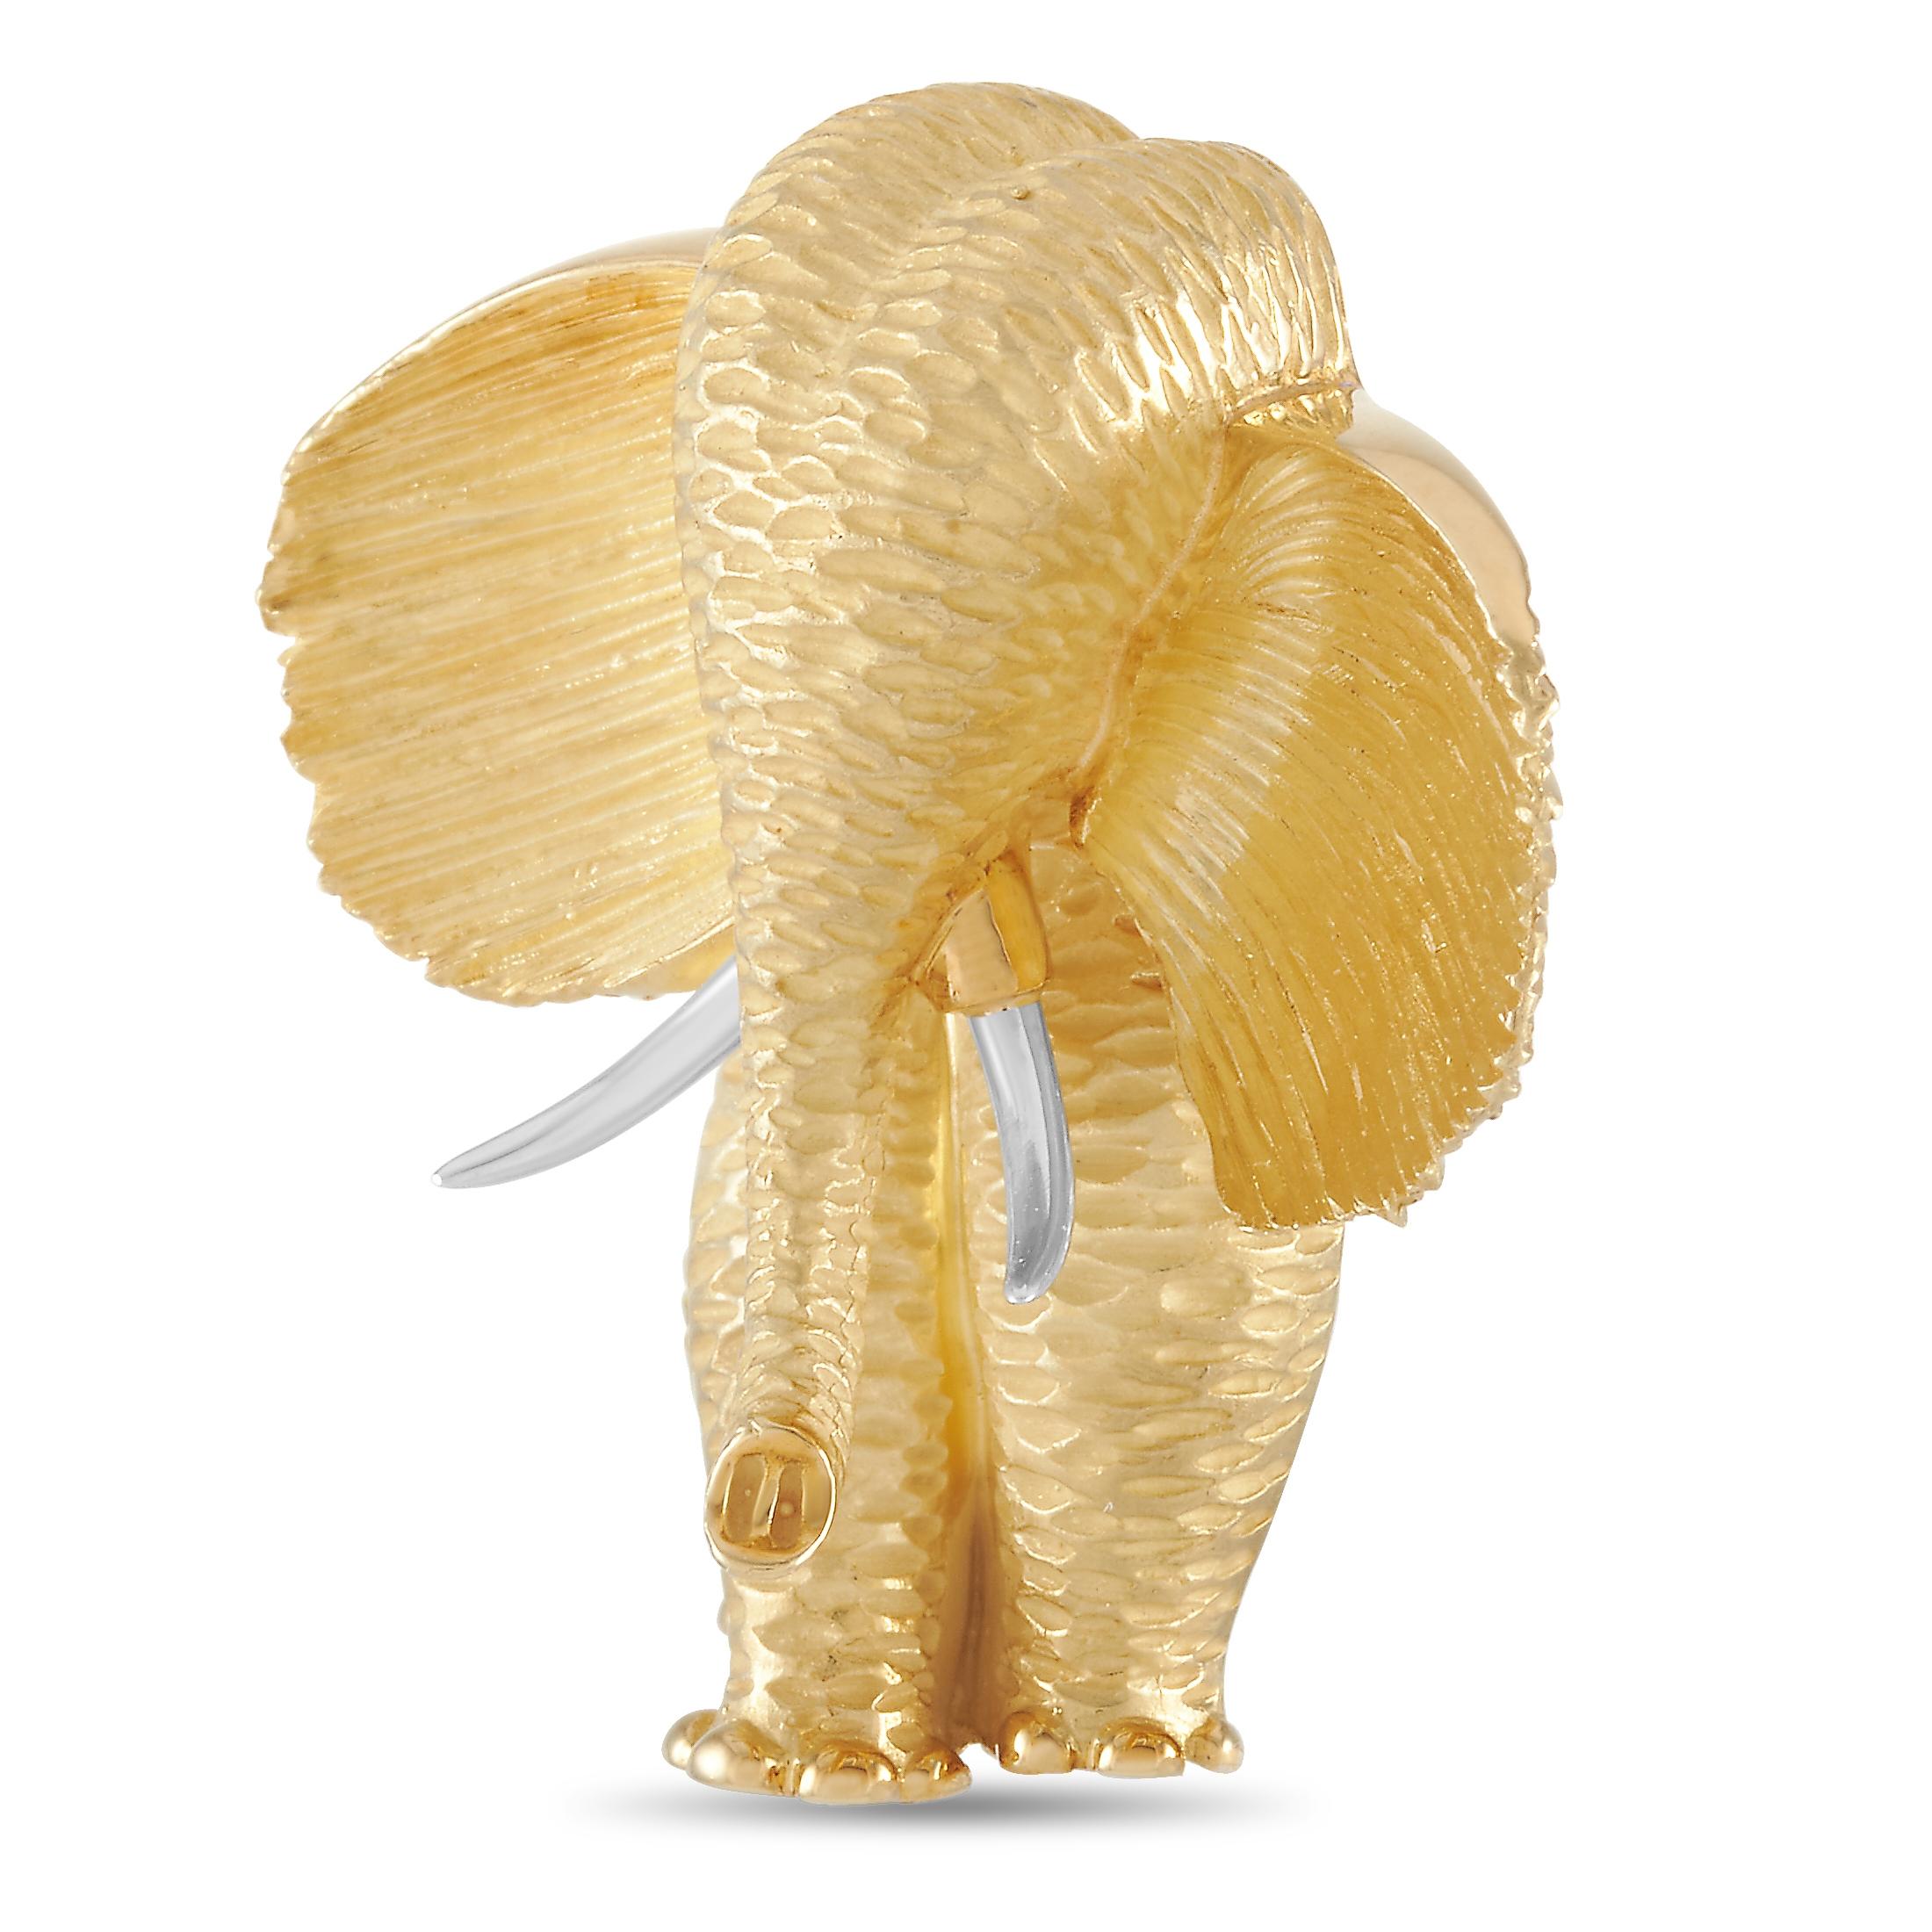 This Henry Dunay elephant brooch is made of 18K yellow gold and weighs 16.1 grams. It measures 1.25” in length and 1.25” in width.
 
 The brooch is offered in estate condition and includes the manufacturer’s box.